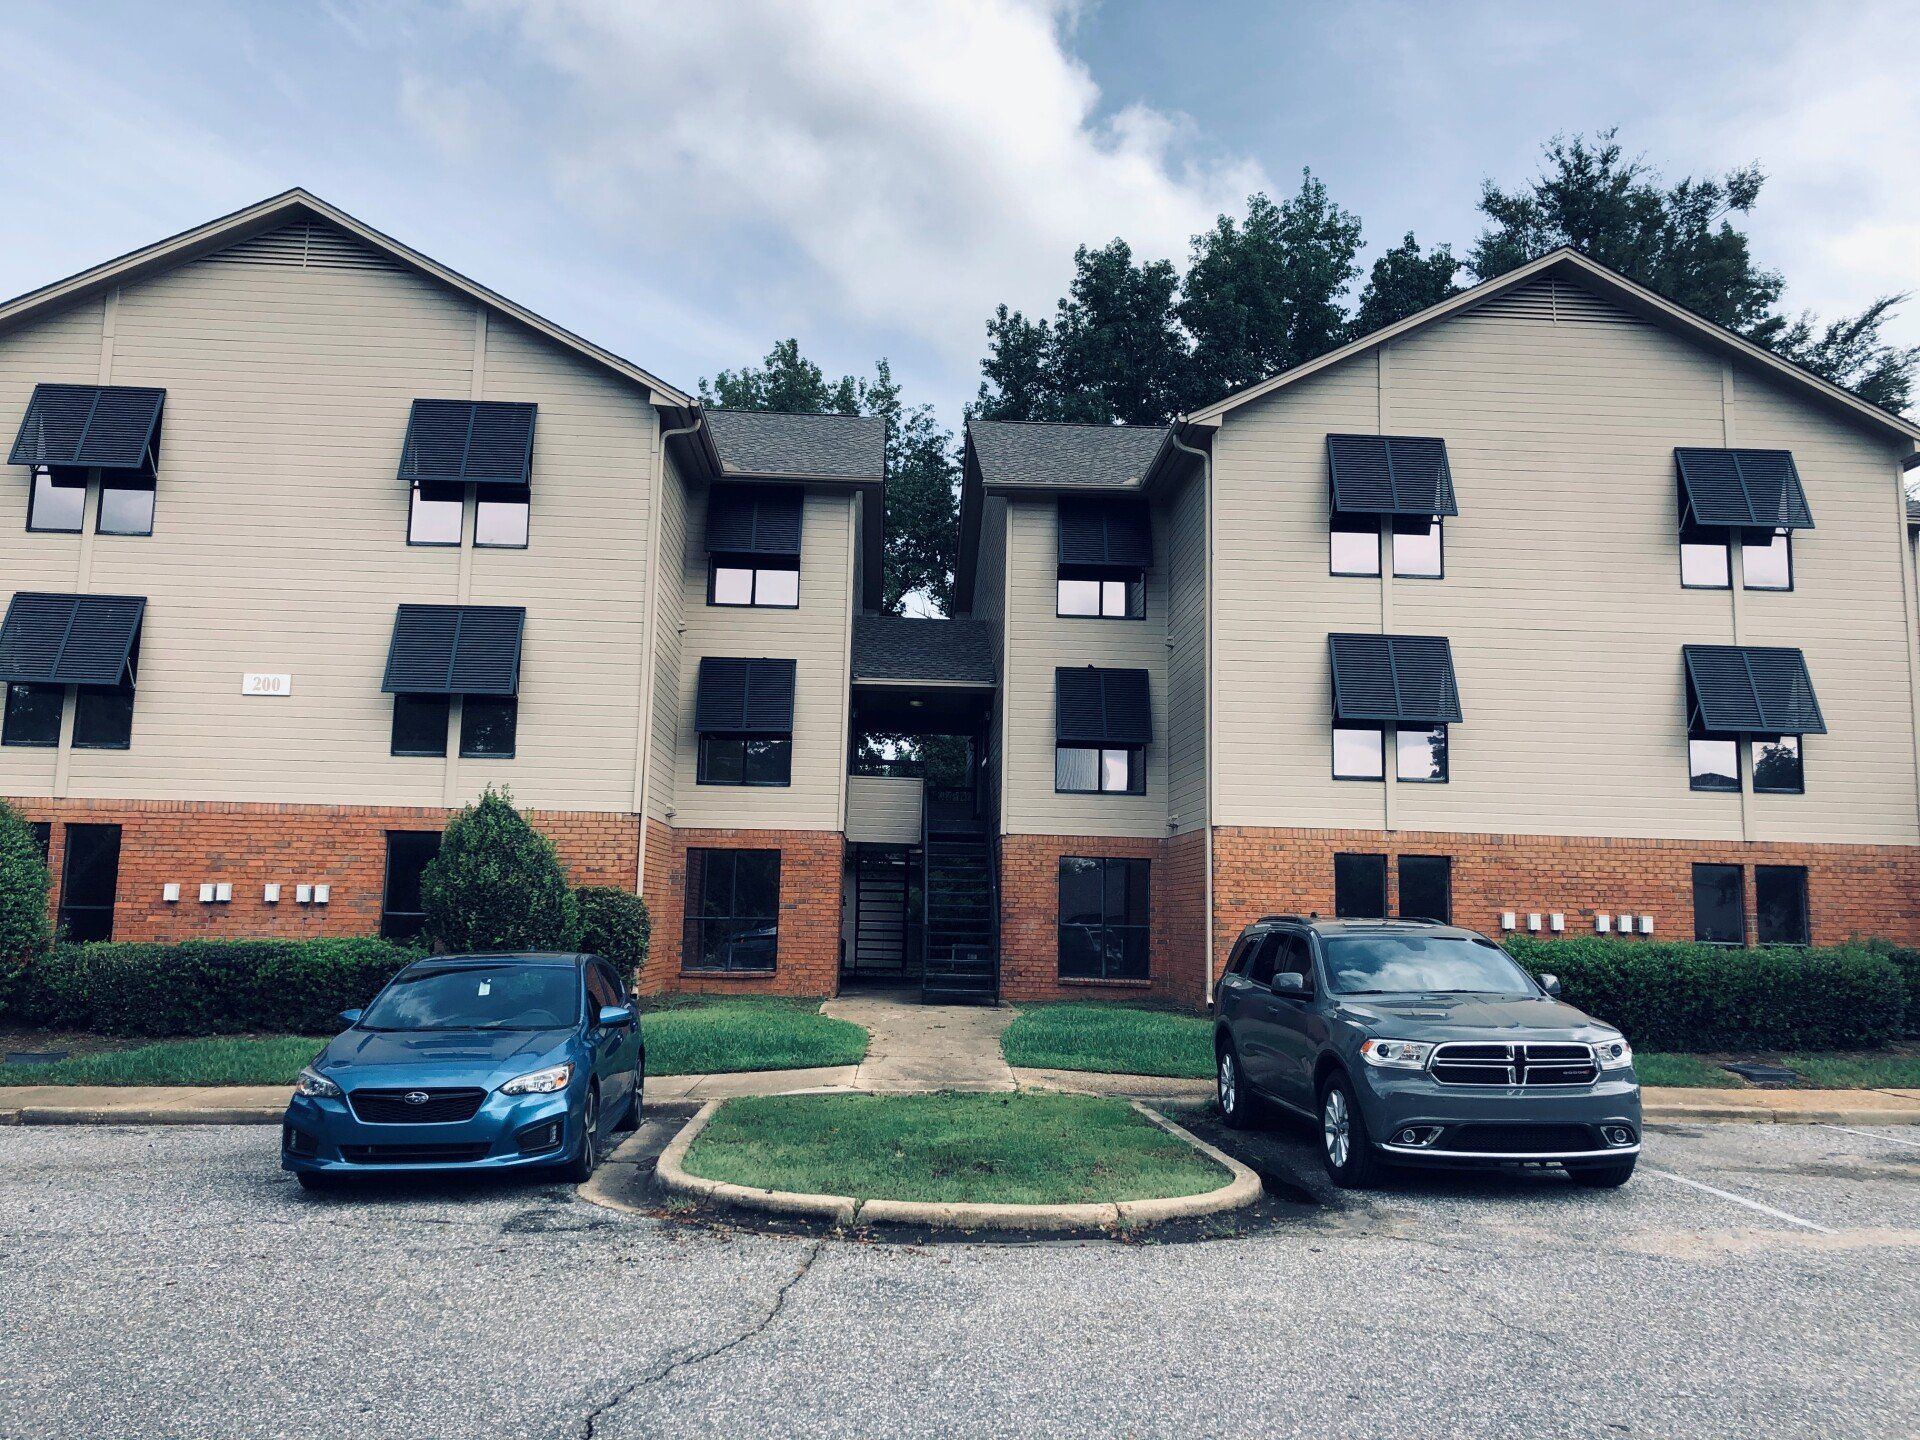 tint residential in Alabama - SPF Residential Tint installation blocking 74% Heat at Arbors on Taylor apartment building 2 in Montgomery, AL